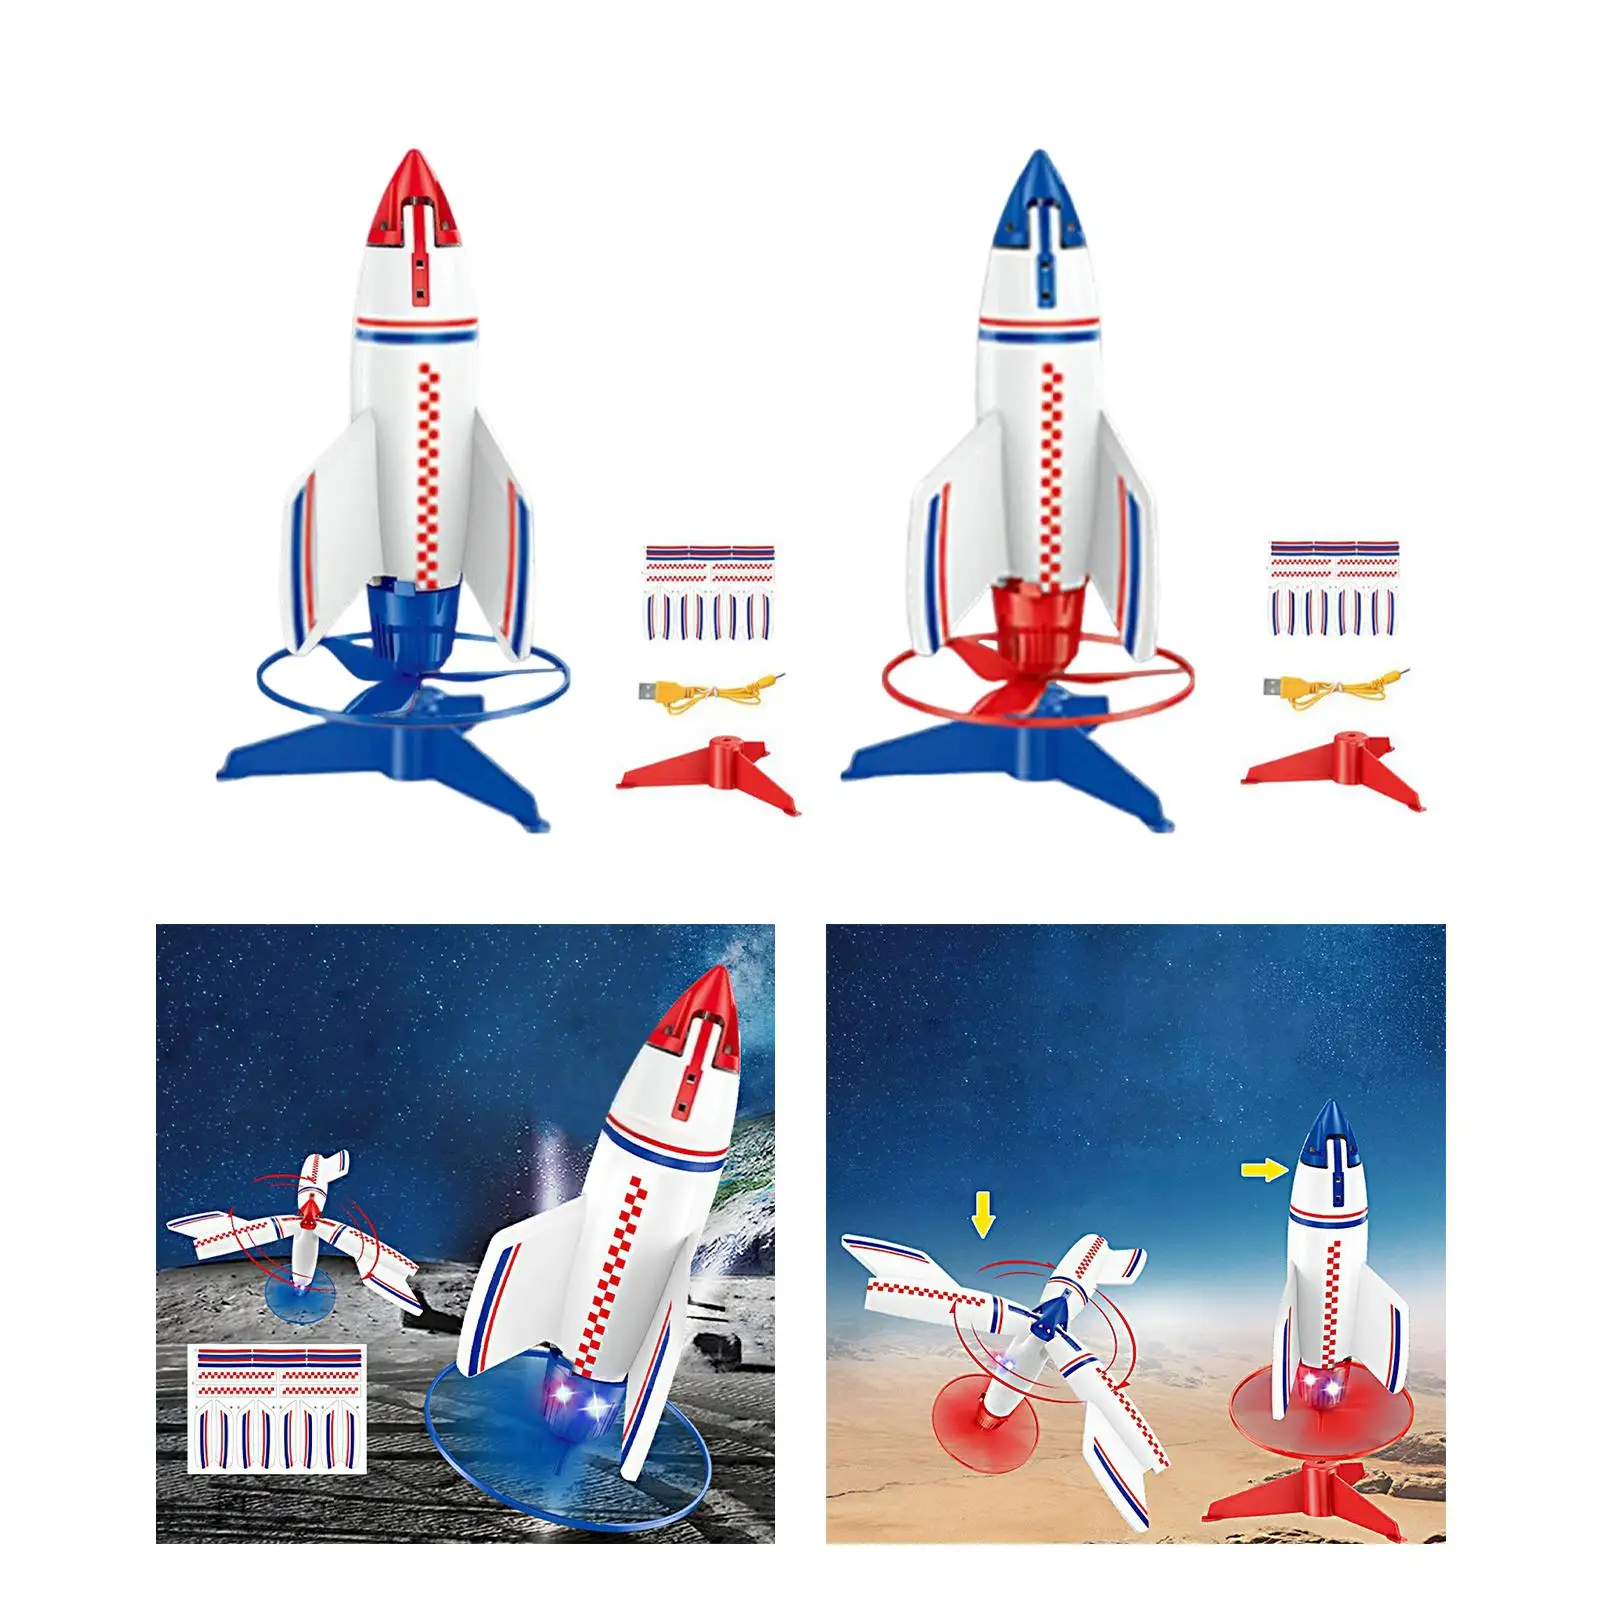 rocket Launcher Toys Games Activities Party Birthday Gifts Toys